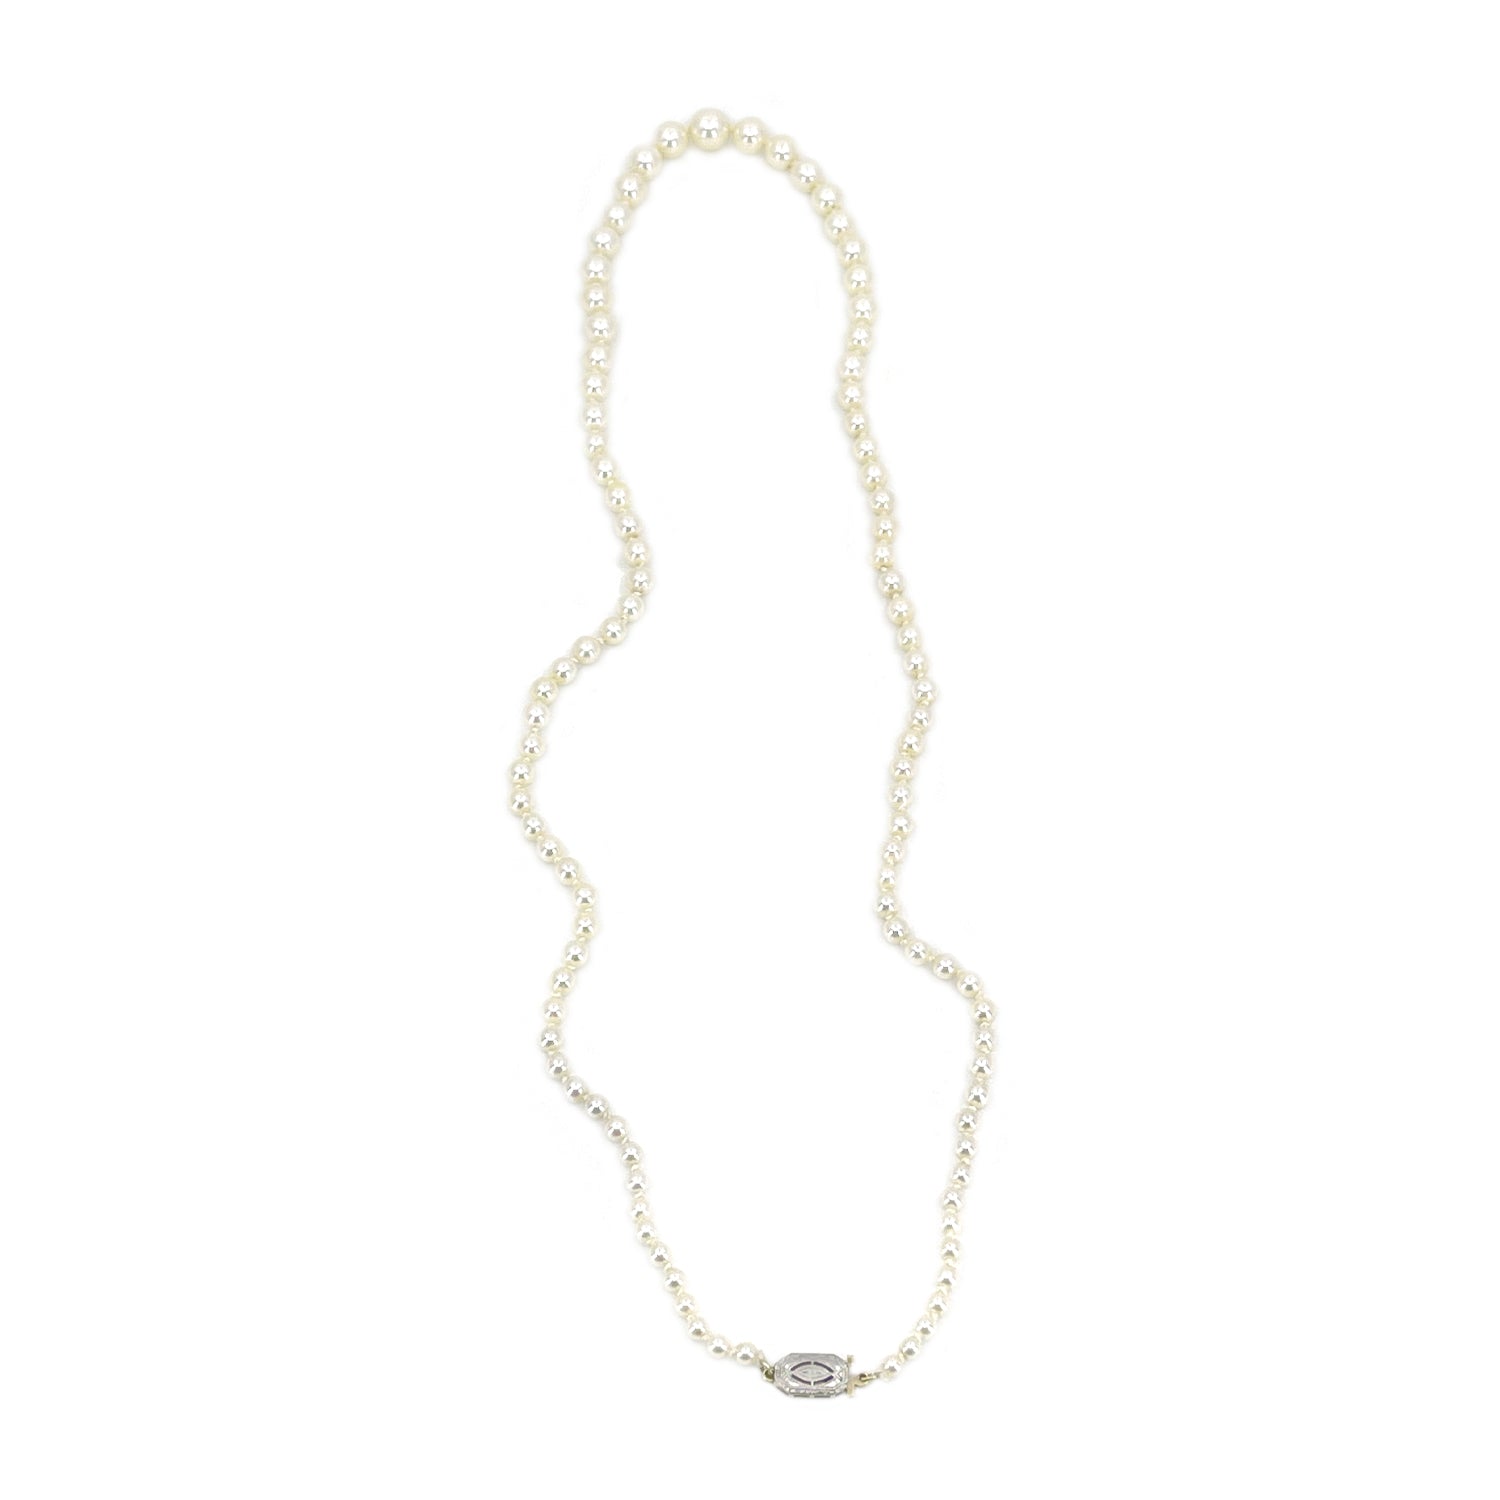 Art Deco Two-Tone Engraved Japanese Saltwater Cultured Akoya Pearl Necklace - 14K Gold 20.25 Inch